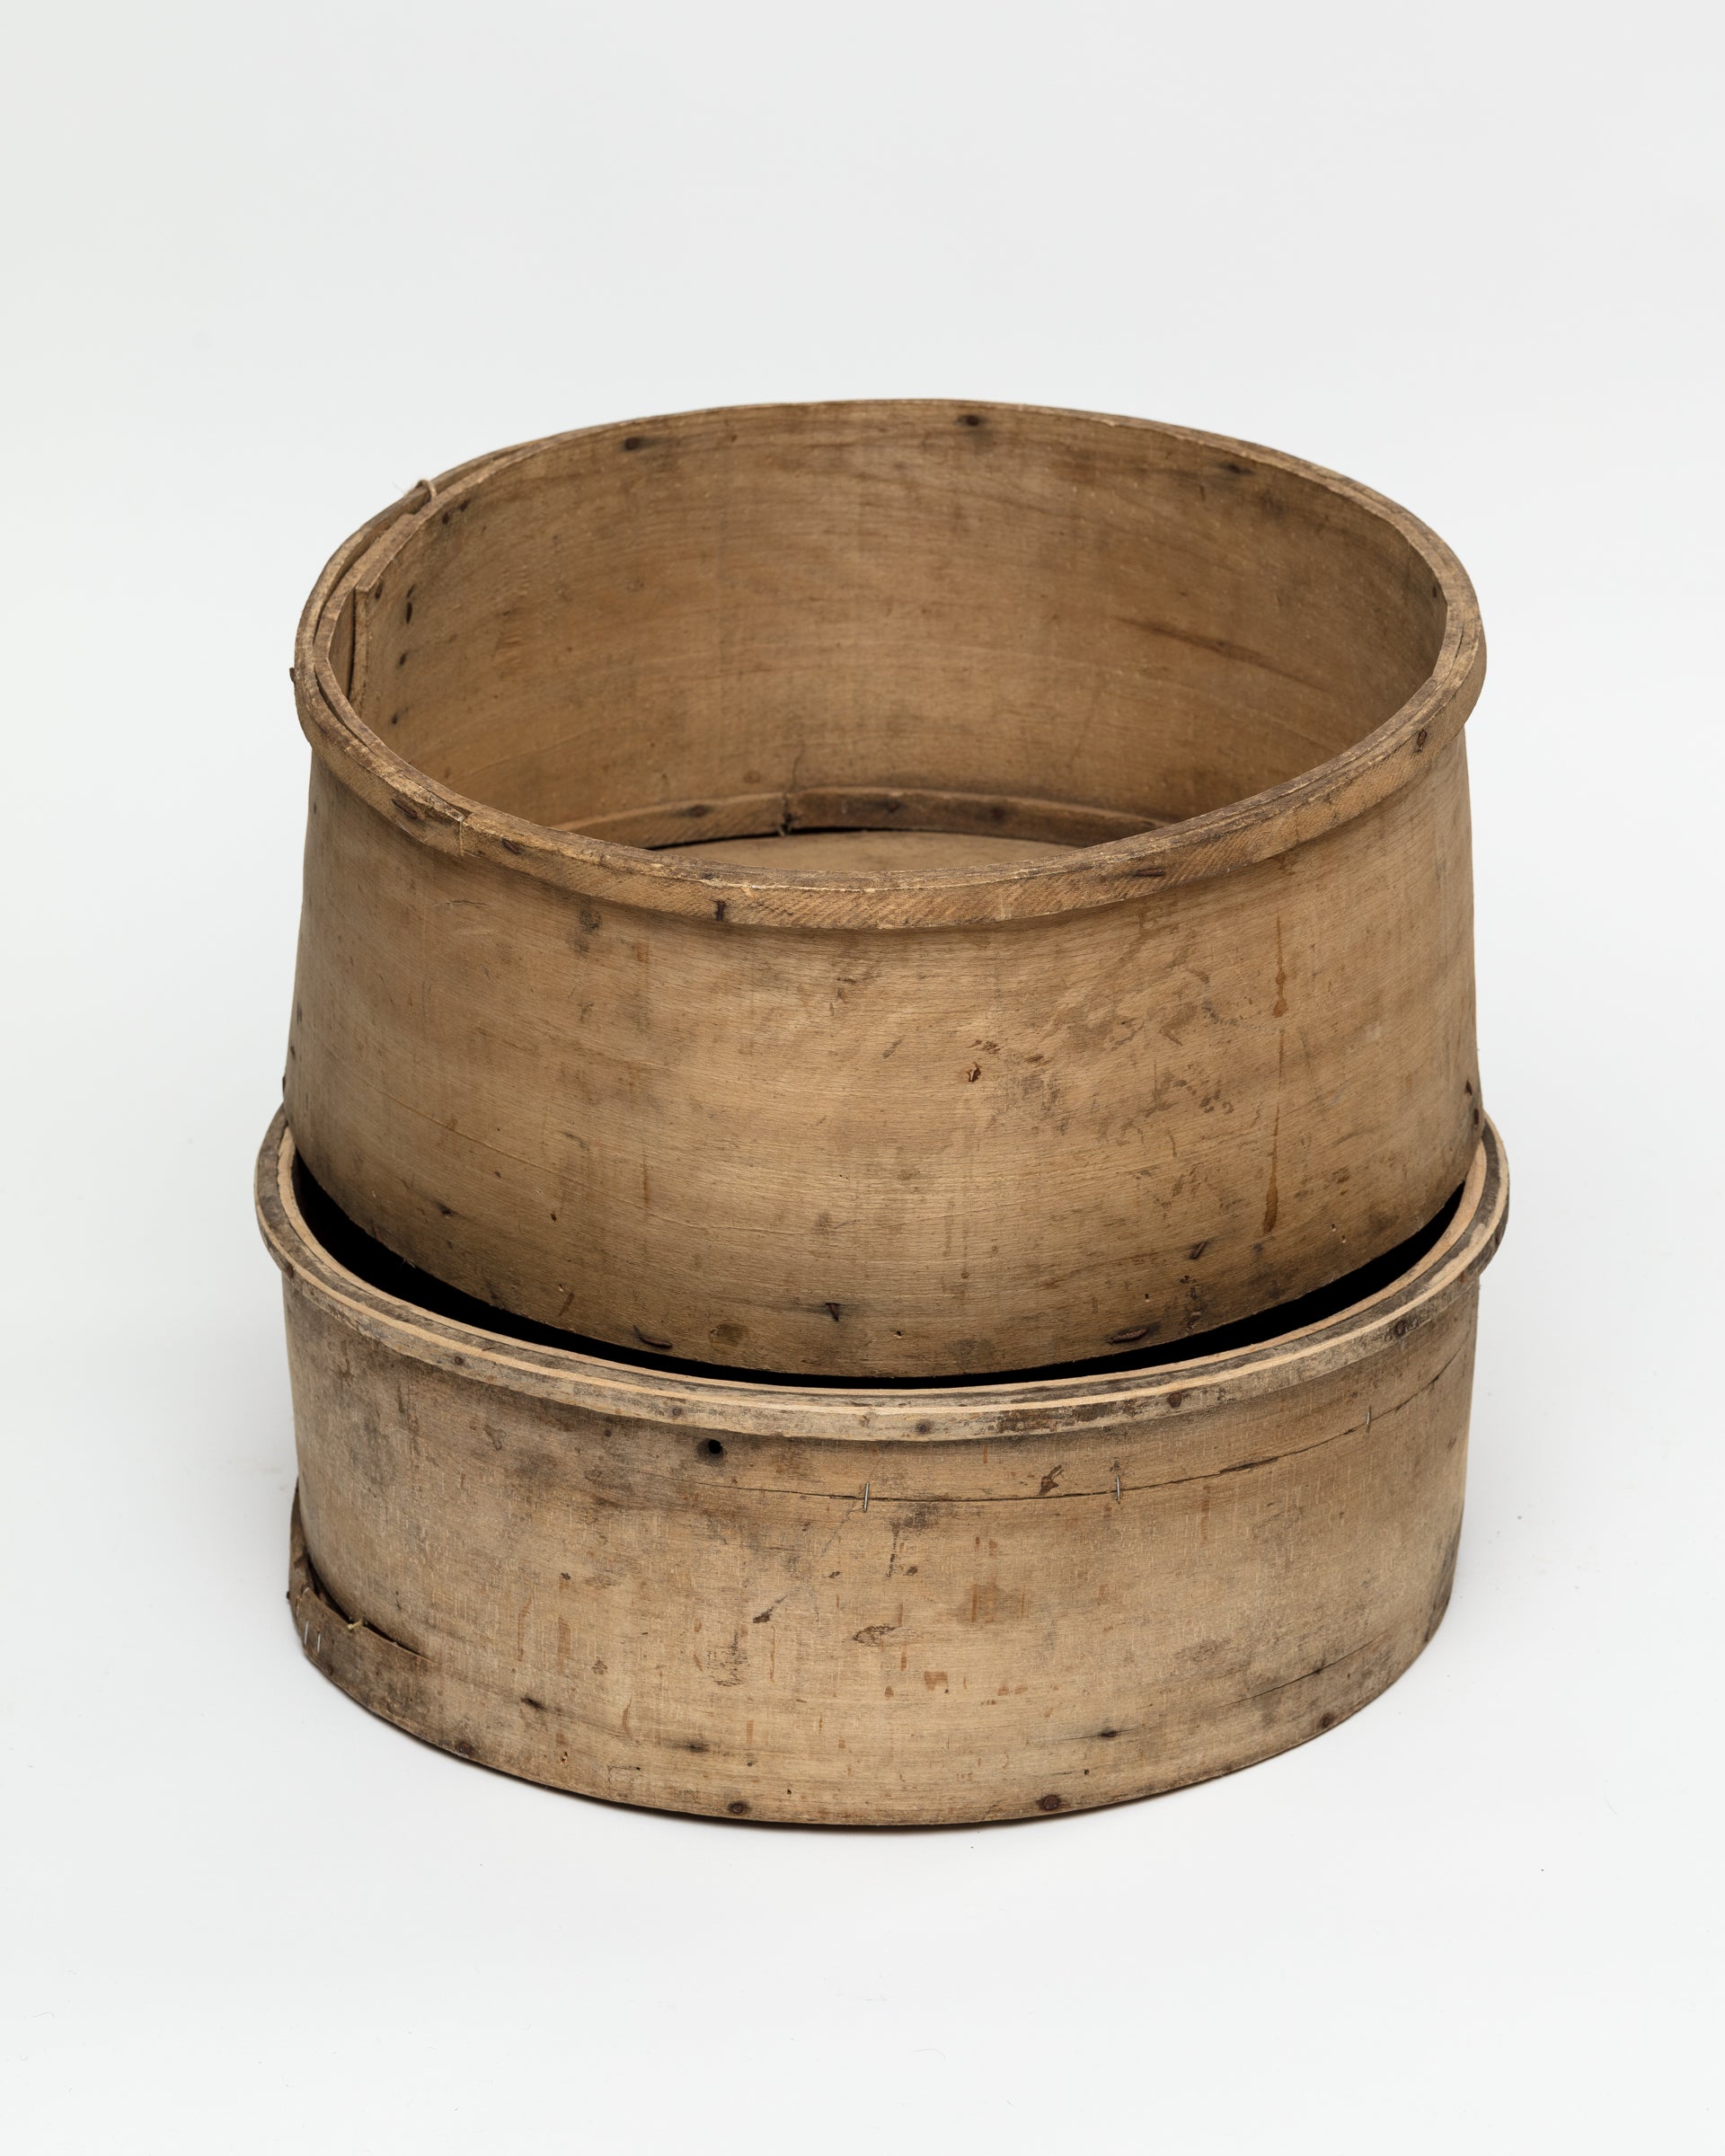 Two Indus Design Imports CHEESE MOLD BUCKET 35 nested together, viewed on a plain white background in a Scottsdale Arizona bungalow. The wooden containers are circular with visible aging and patina.